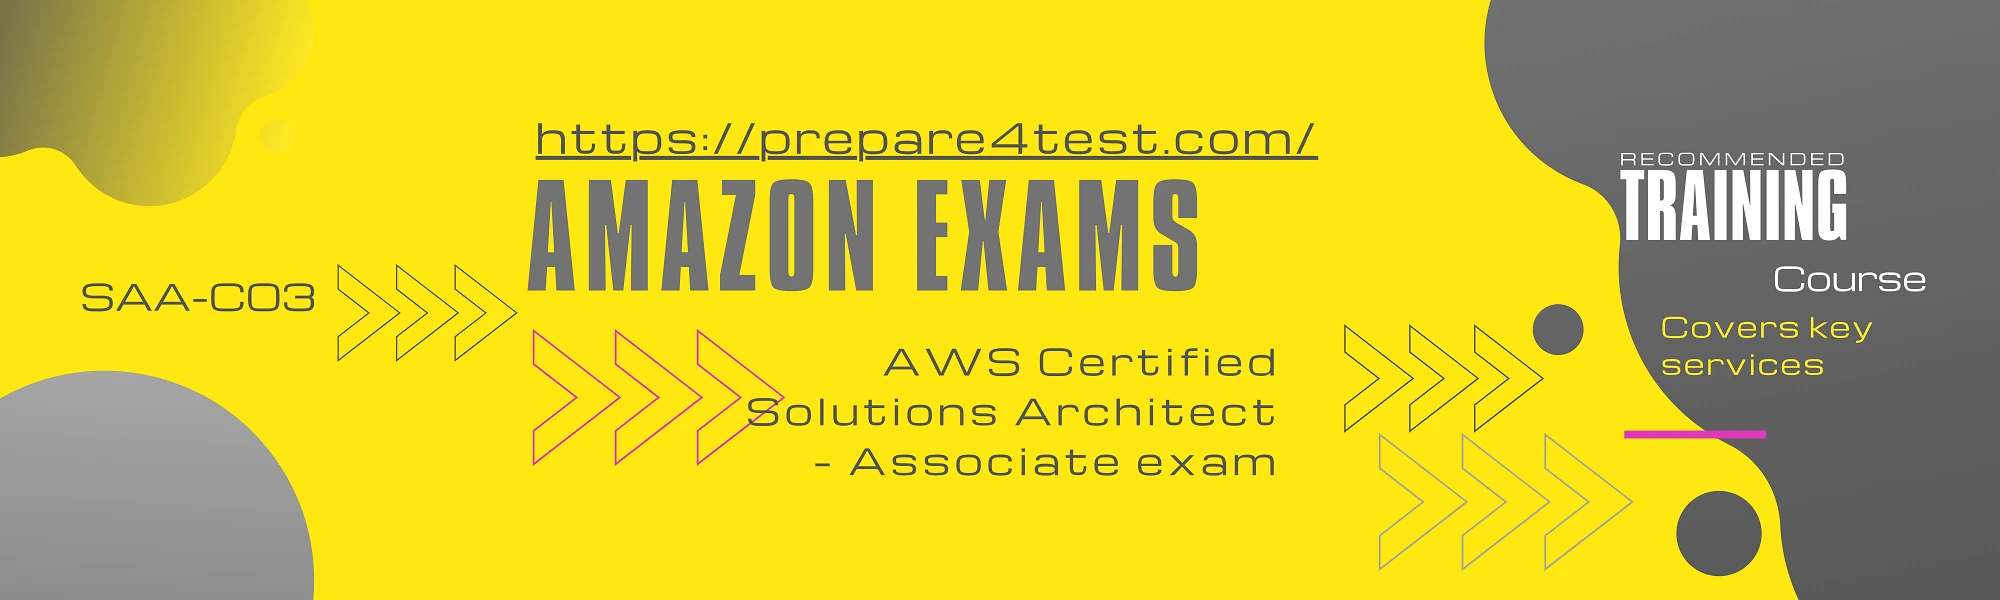 How to Pass the AWS Certified Solutions Architect Associate Exam on Your First Try